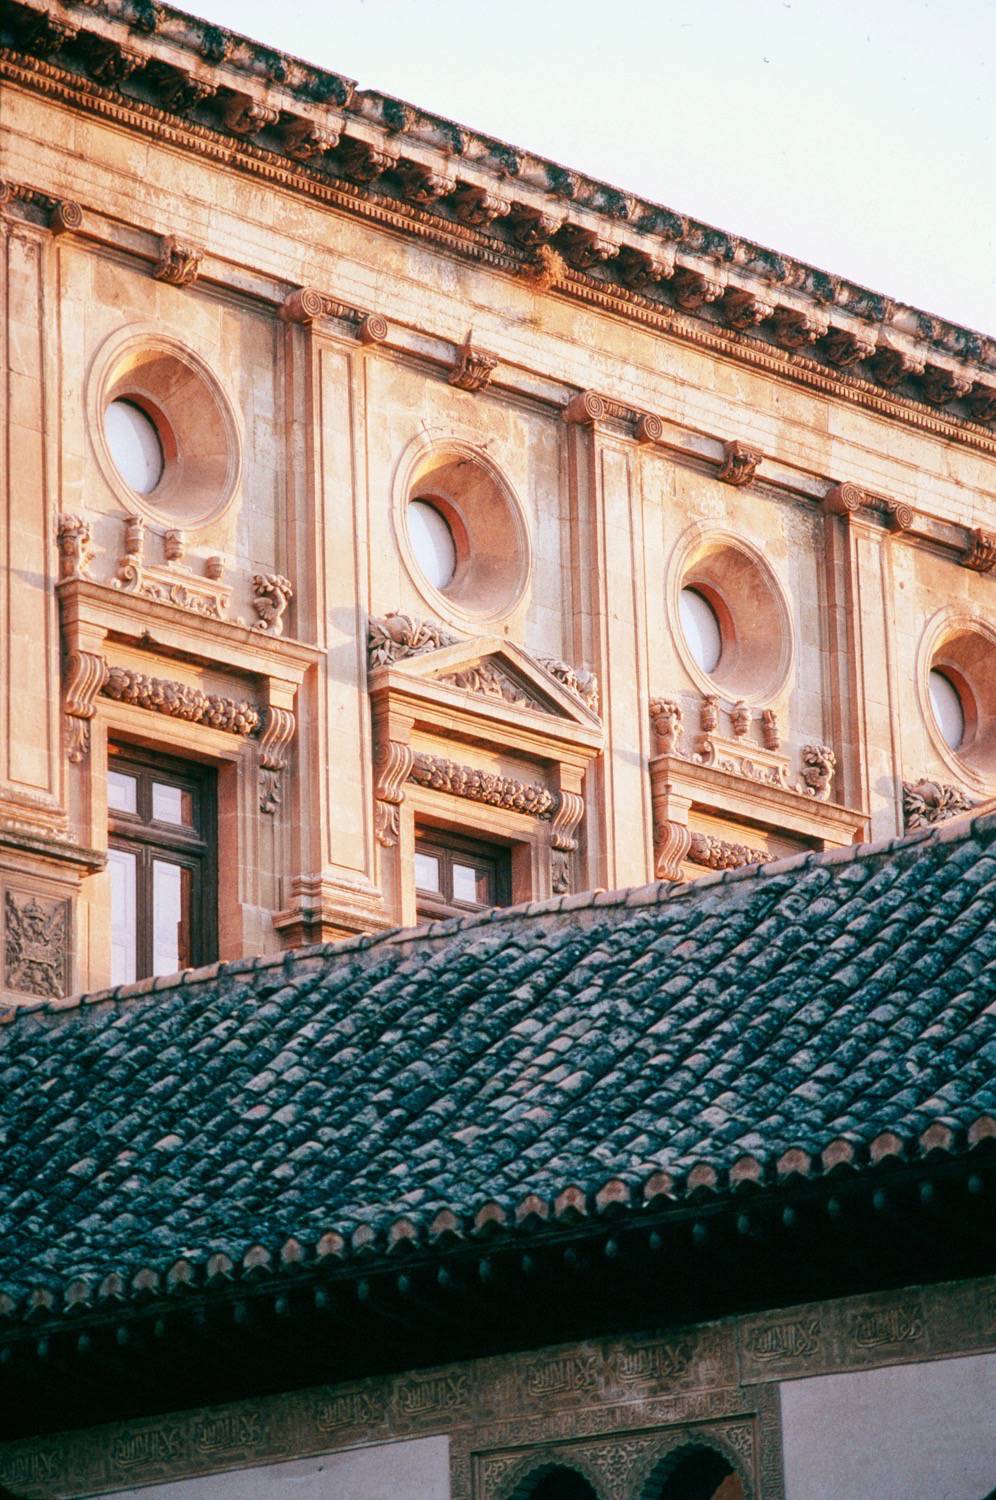 Palace seen from Court of the Myrtles, looking south, detail of round windows below roofline